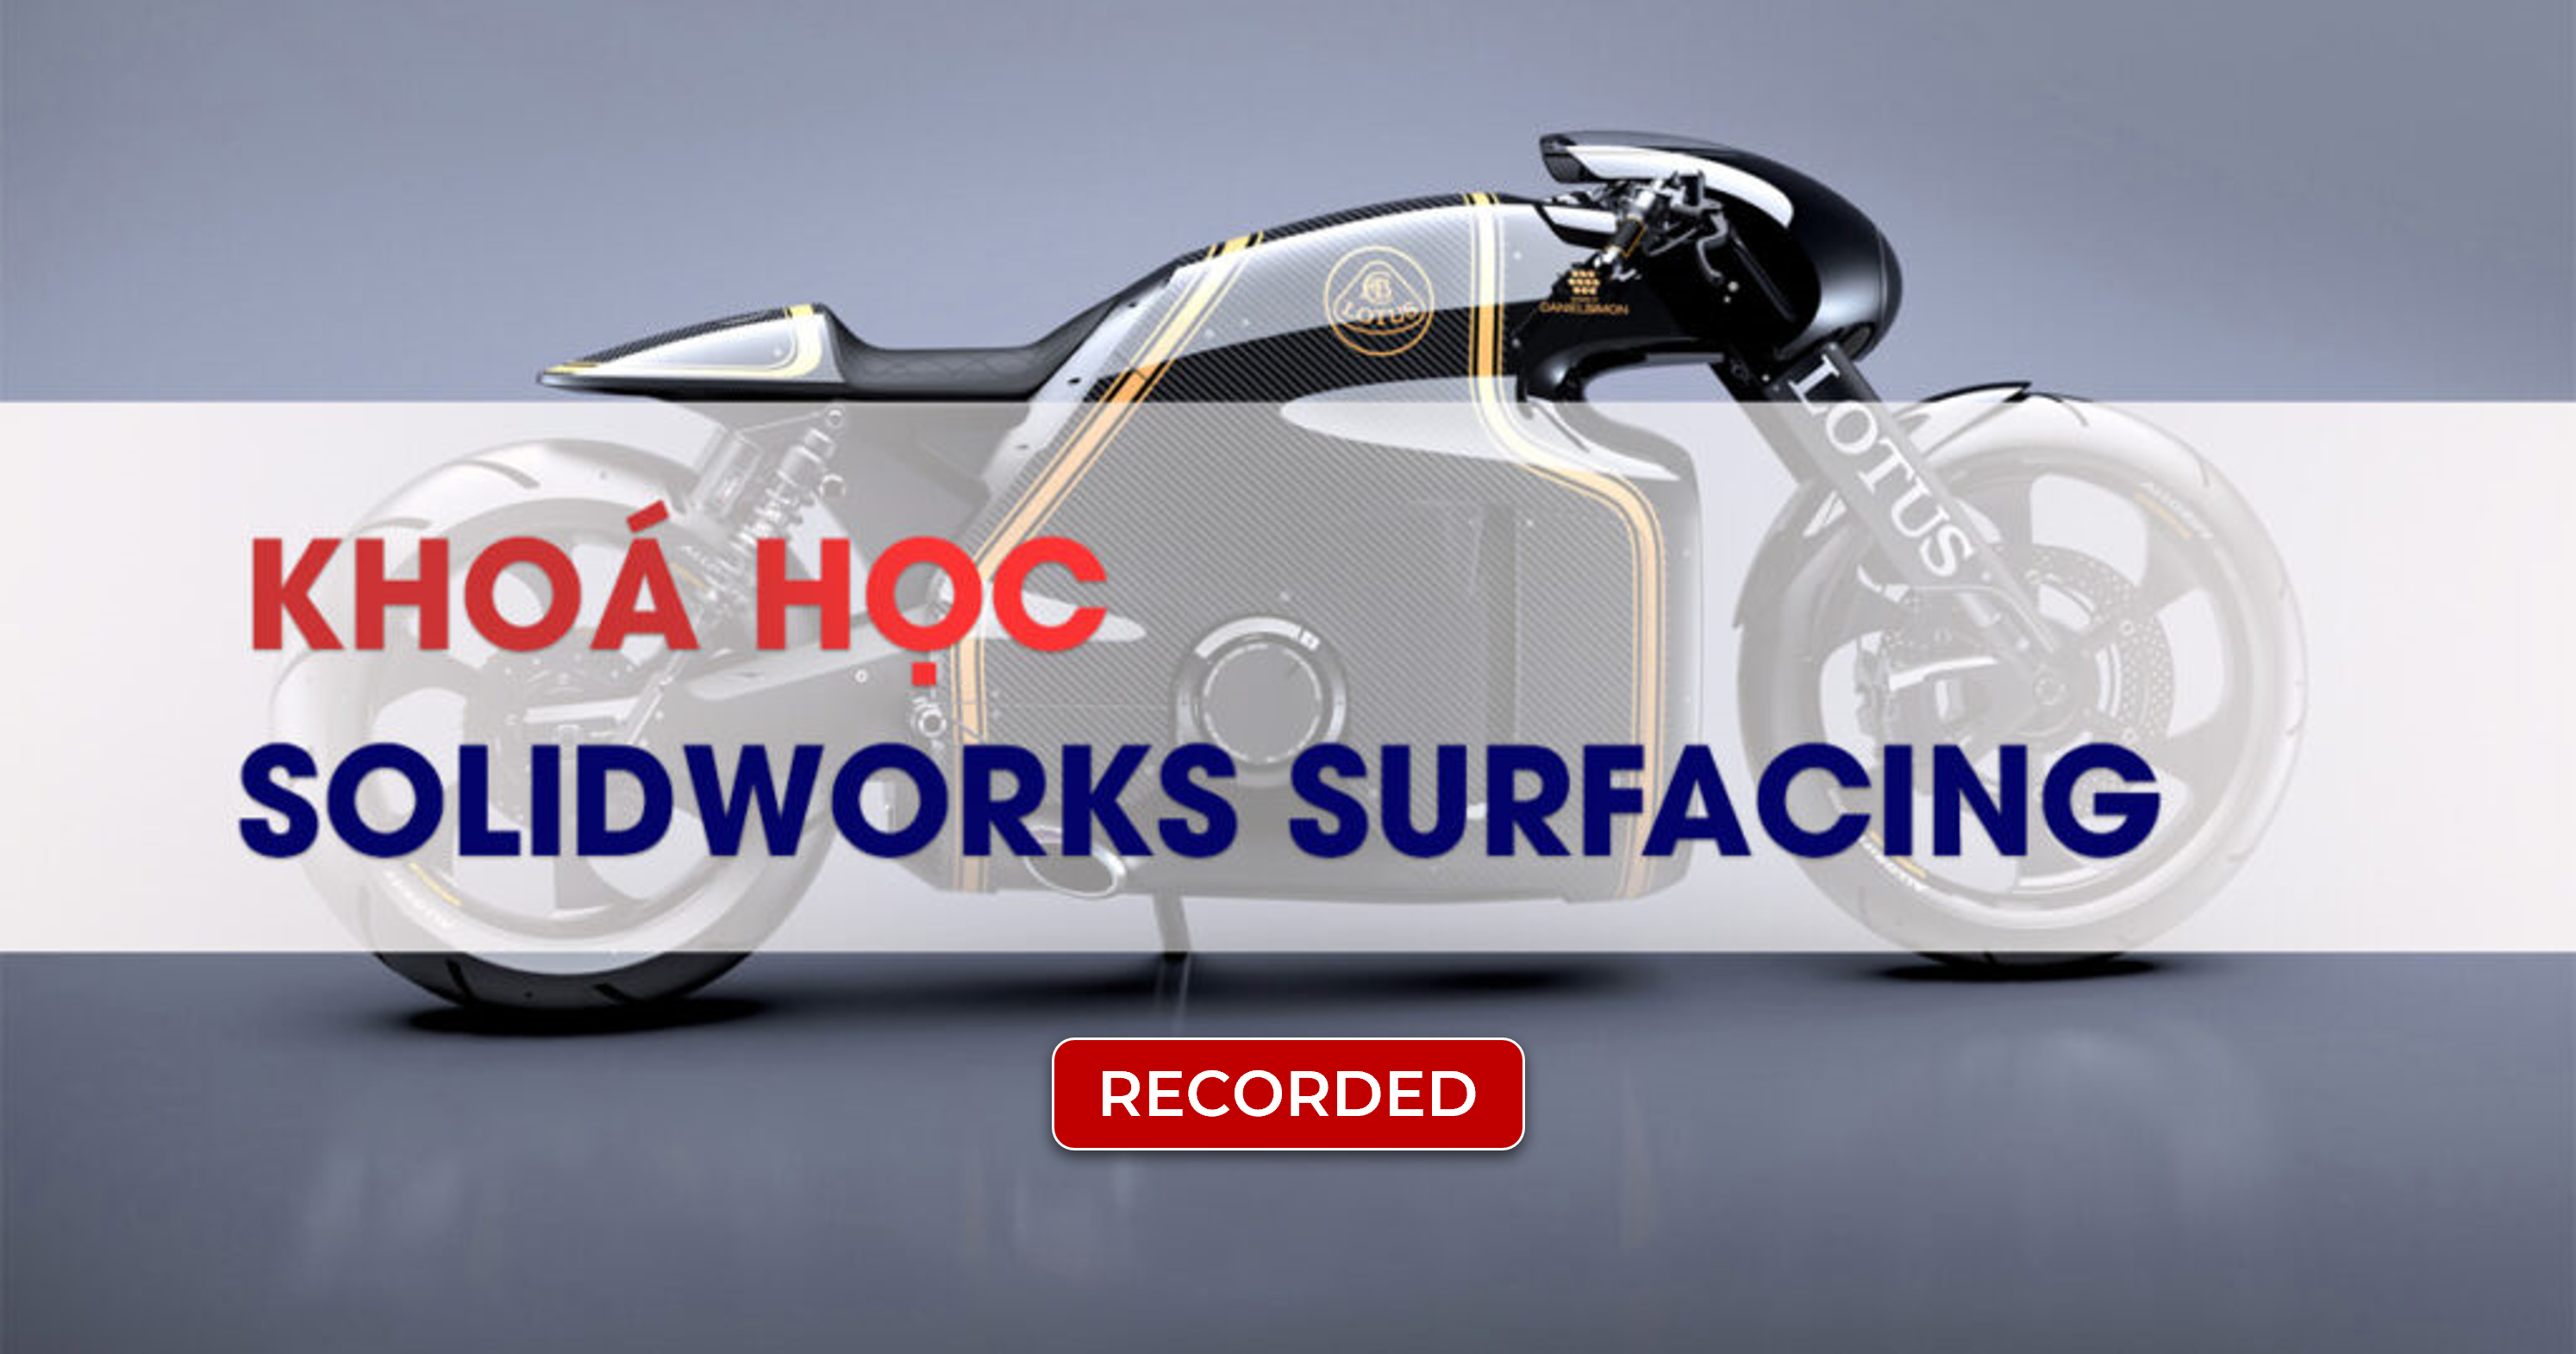 RECORD – SOLIDWORKS SURFACING